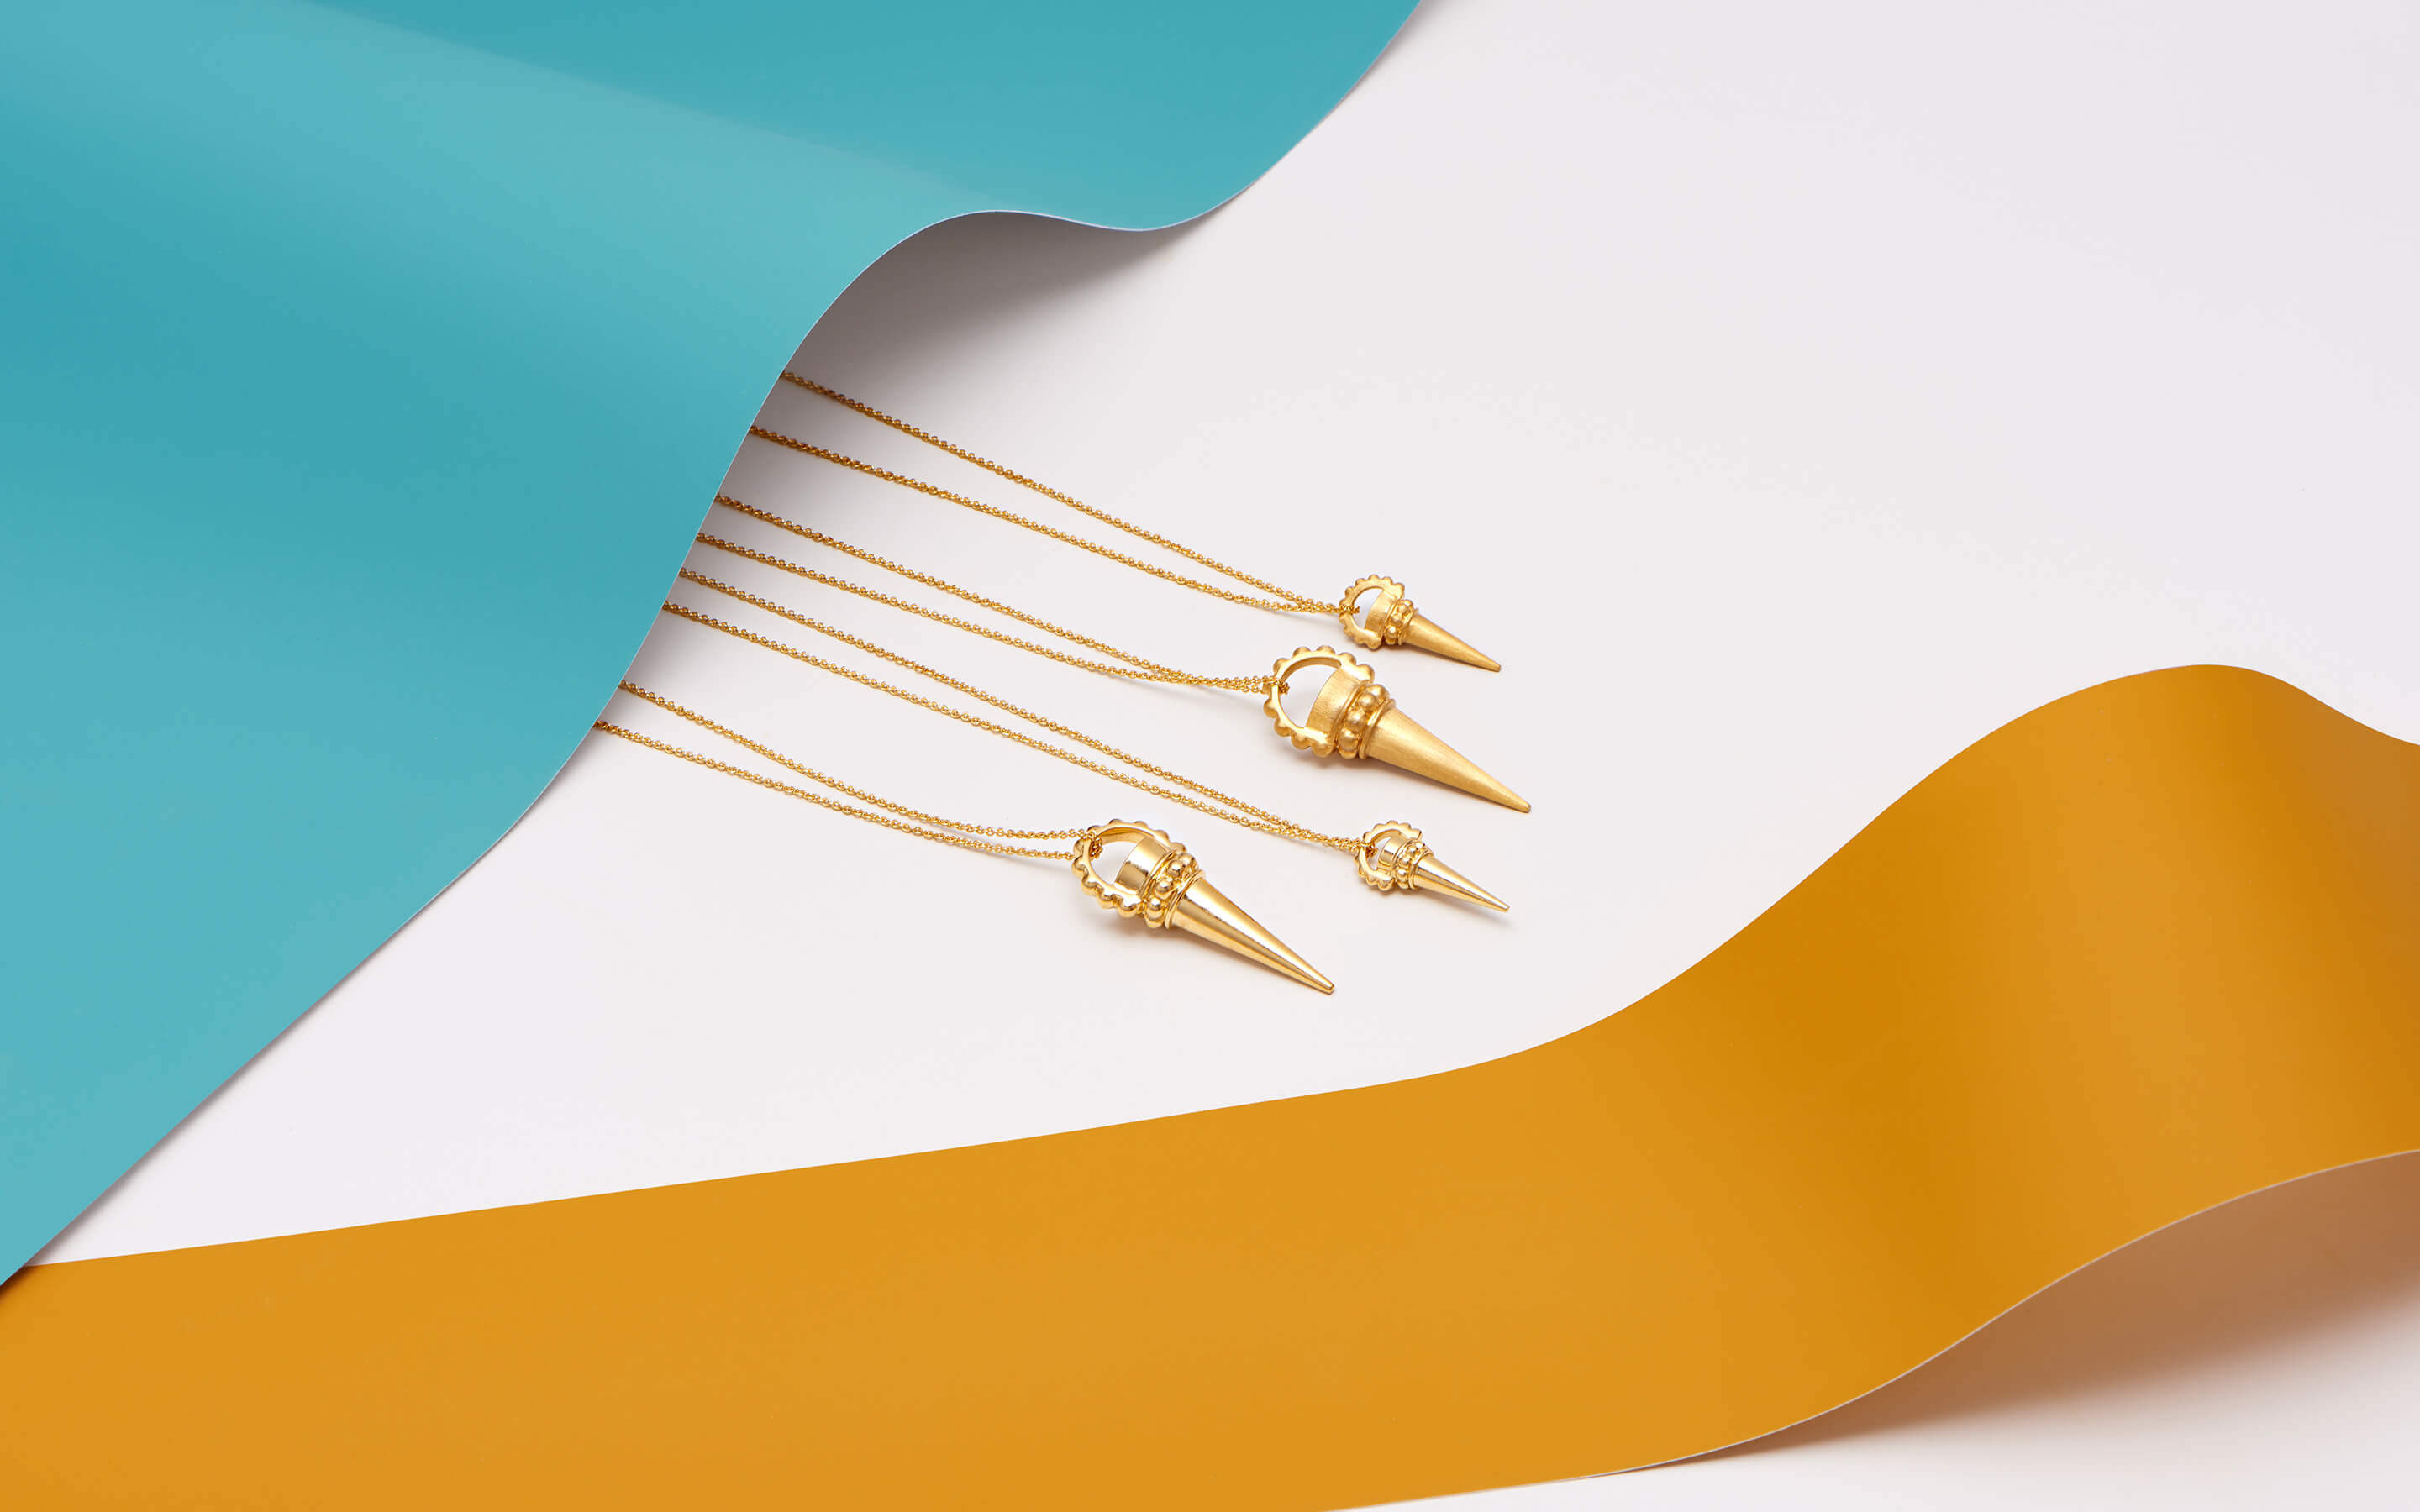 Auvere 22 and 24 karat gold jewelry from the Gold Play campaign